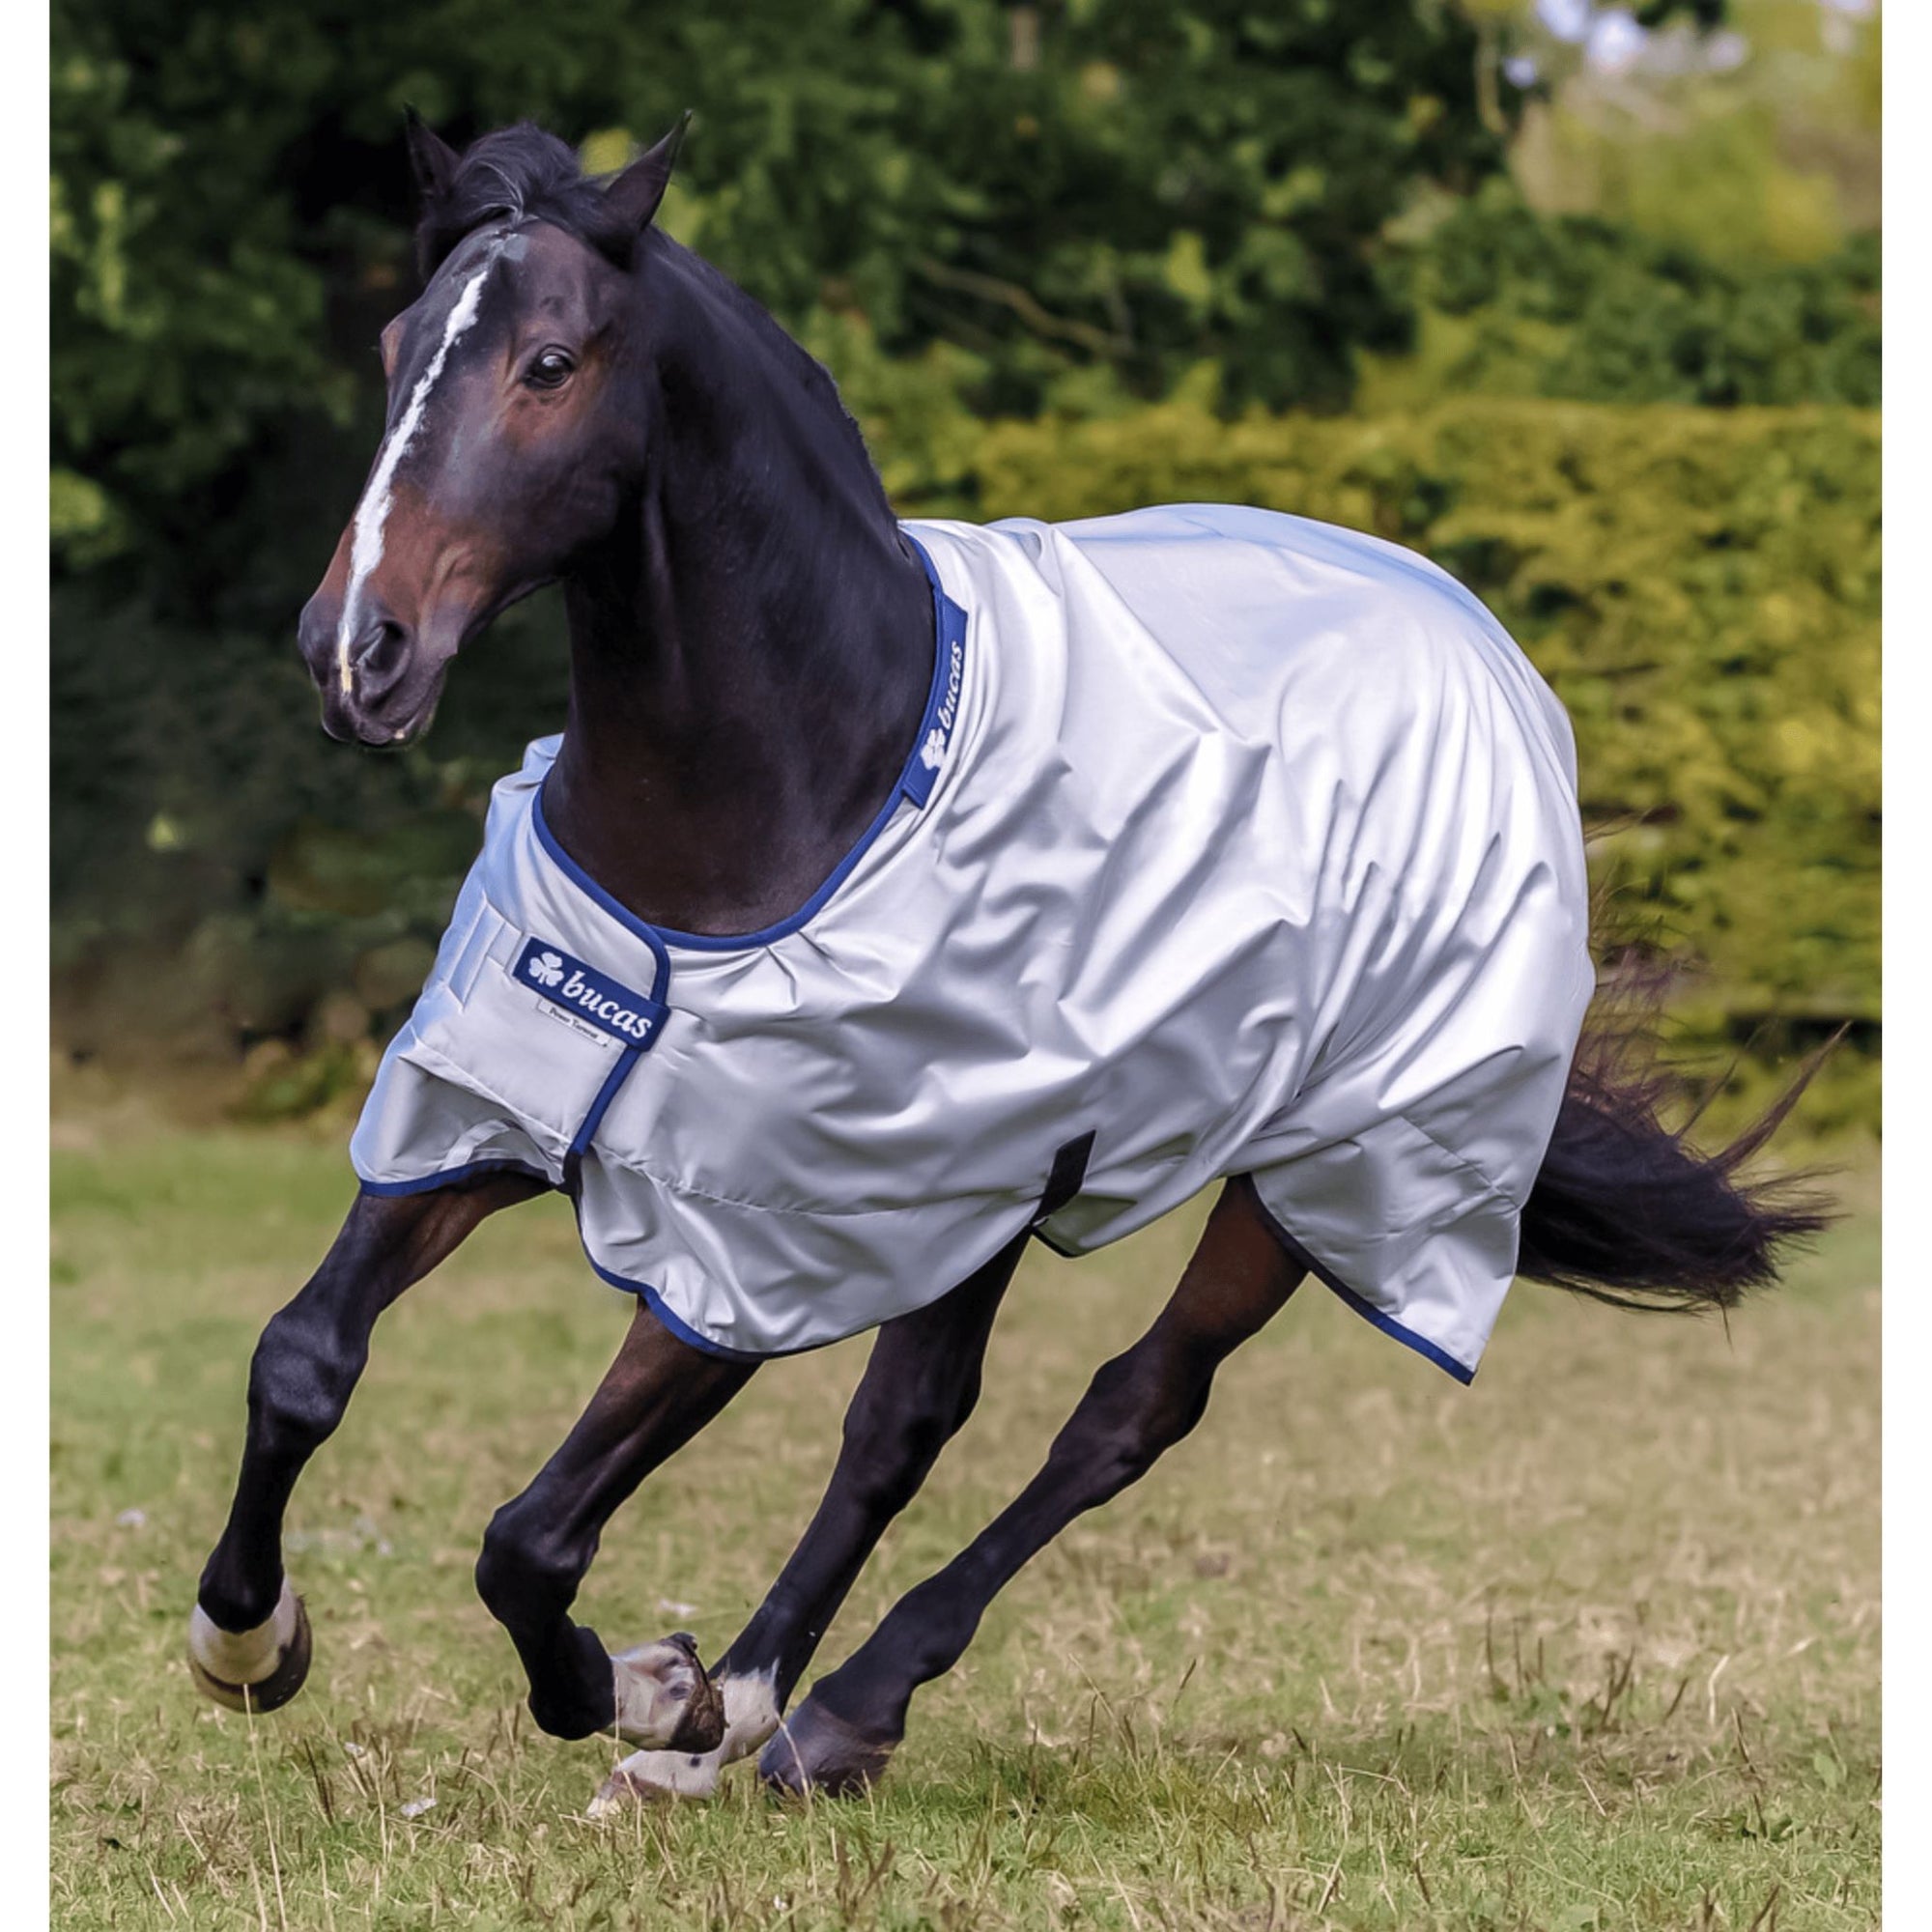 Dark bay horse cantering, wearing silver Bucas rug with blue trim.